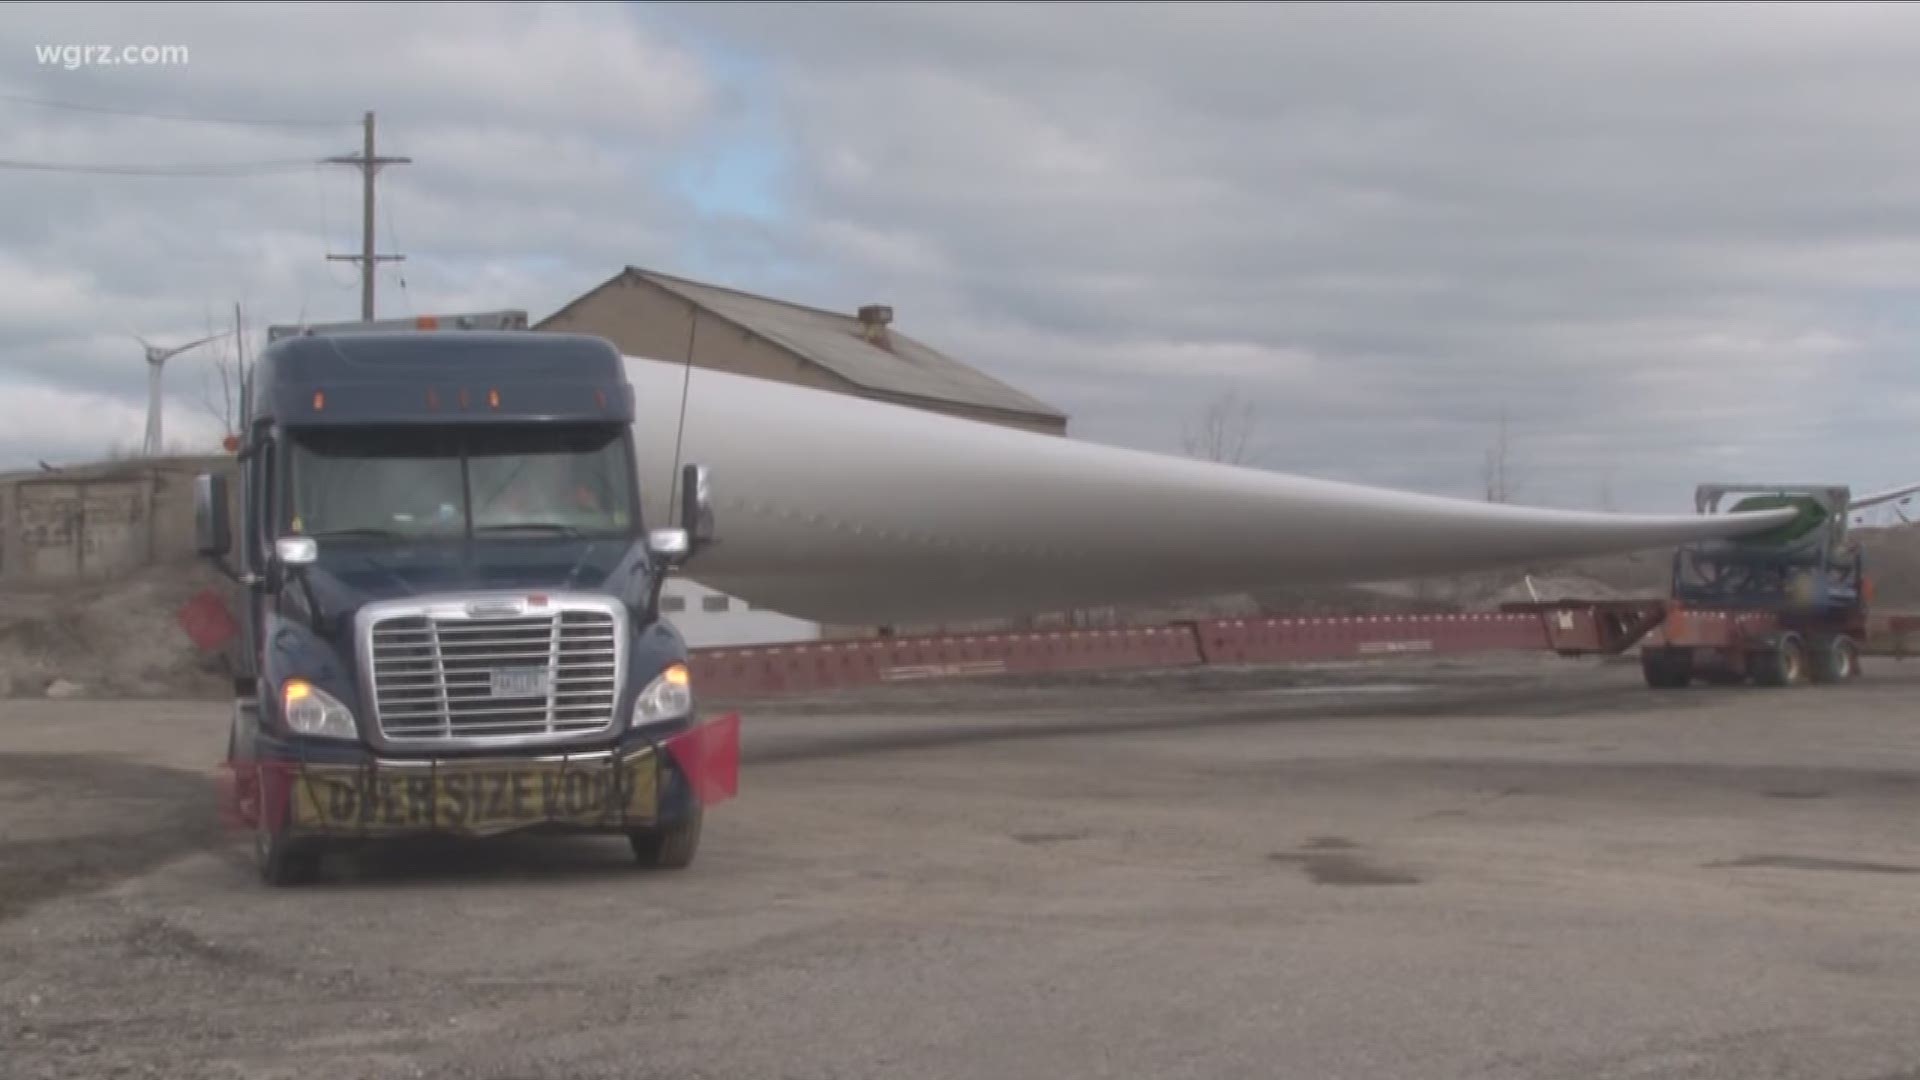 Massive Turbine Pieces To Hit The Road In WNY